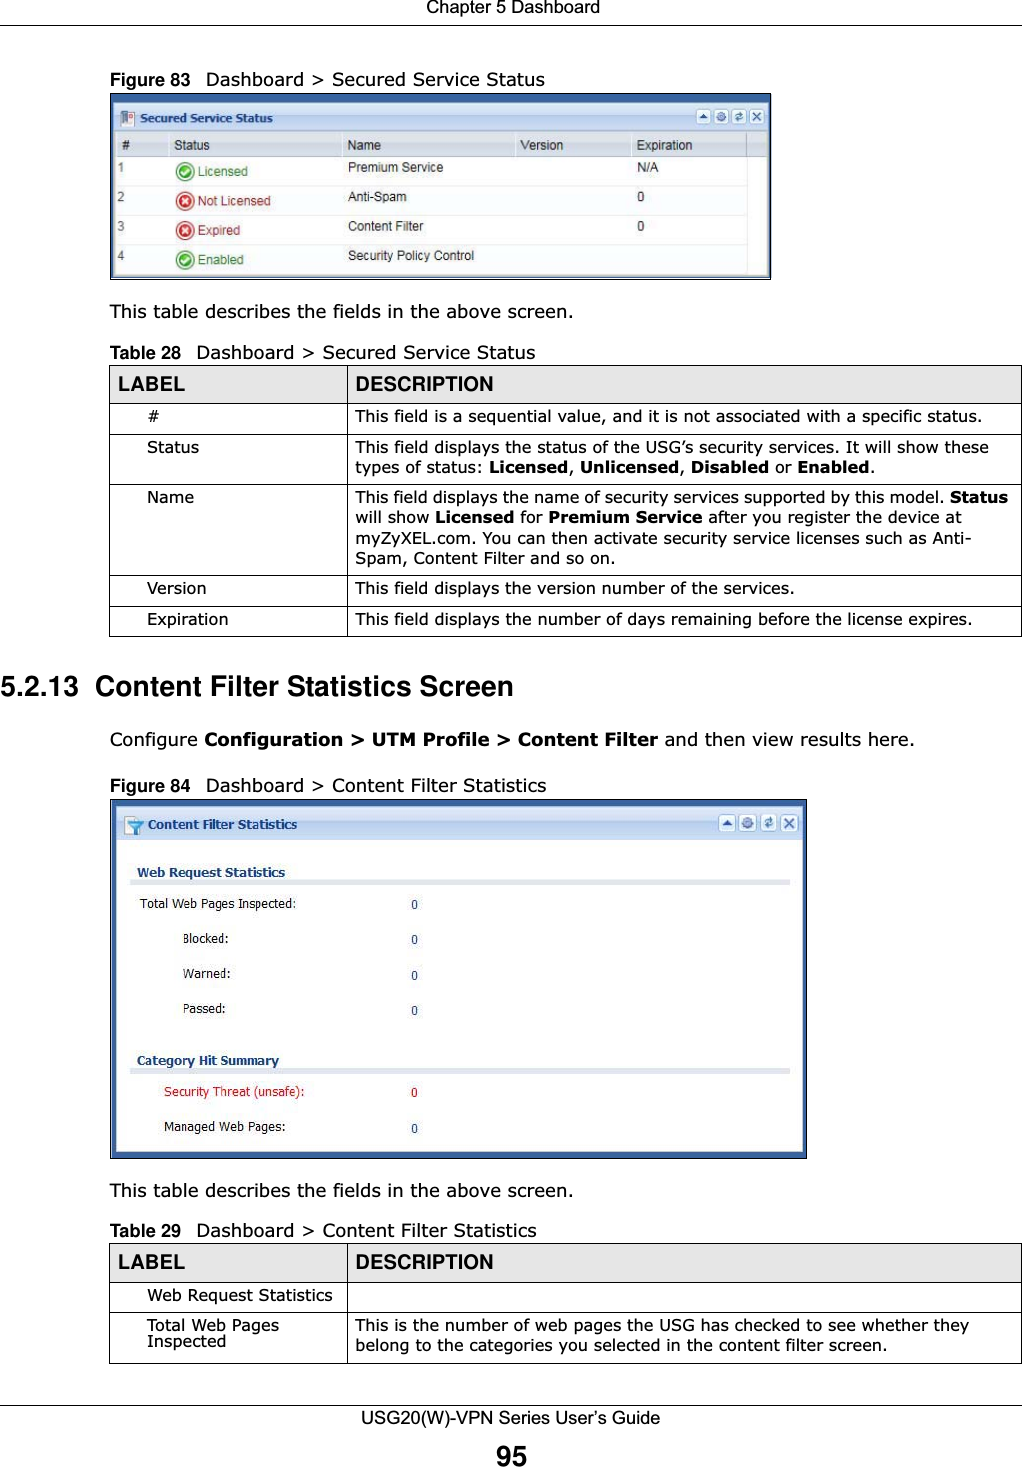  Chapter 5 DashboardUSG20(W)-VPN Series User’s Guide95Figure 83   Dashboard &gt; Secured Service Status This table describes the fields in the above screen. 5.2.13  Content Filter Statistics ScreenConfigure Configuration &gt; UTM Profile &gt; Content Filter and then view results here.Figure 84   Dashboard &gt; Content Filter StatisticsThis table describes the fields in the above screen. Table 28   Dashboard &gt; Secured Service StatusLABEL DESCRIPTION# This field is a sequential value, and it is not associated with a specific status.Status This field displays the status of the USG’s security services. It will show these types of status: Licensed, Unlicensed, Disabled or Enabled.Name This field displays the name of security services supported by this model. Status will show Licensed for Premium Service after you register the device at myZyXEL.com. You can then activate security service licenses such as Anti-Spam, Content Filter and so on. Version This field displays the version number of the services.Expiration This field displays the number of days remaining before the license expires.Table 29   Dashboard &gt; Content Filter StatisticsLABEL DESCRIPTIONWeb Request StatisticsTotal Web Pages Inspected This is the number of web pages the USG has checked to see whether they belong to the categories you selected in the content filter screen.